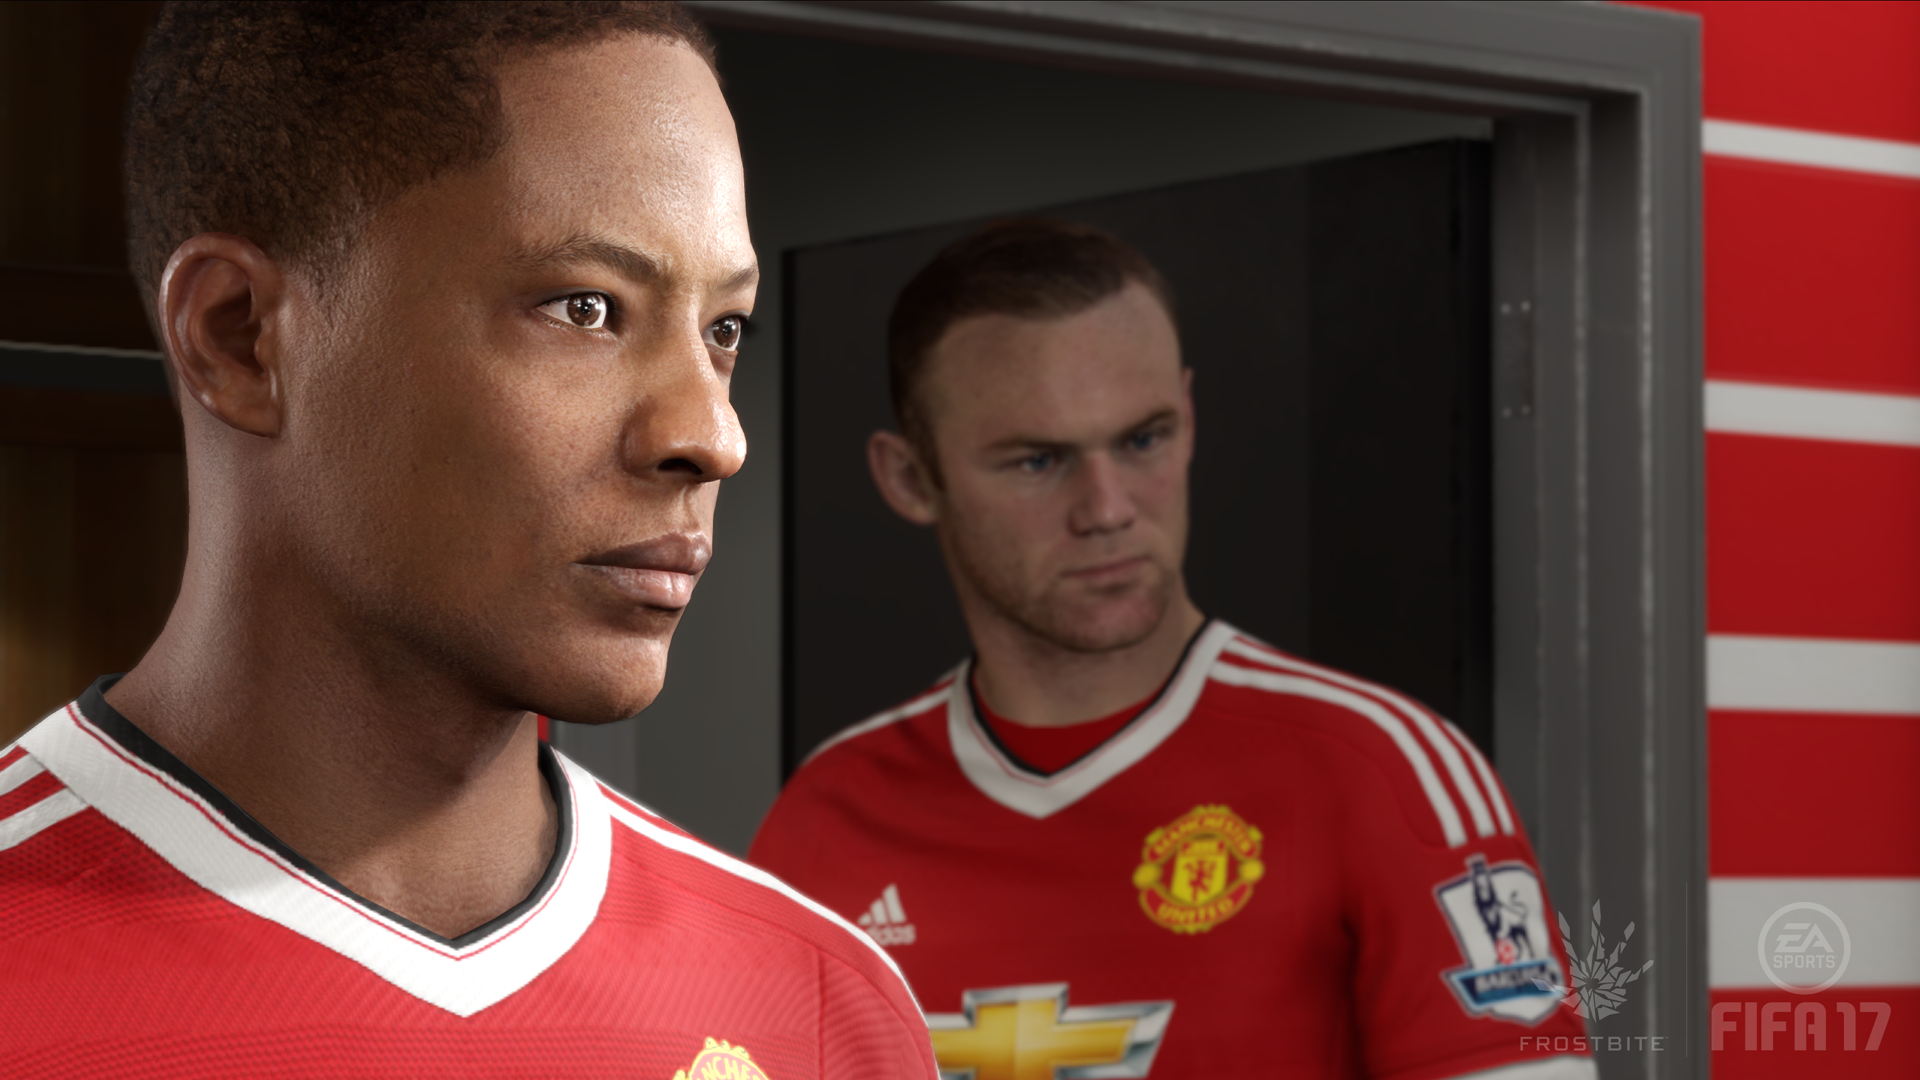 Image for FIFA 17 sells 40x more than PES 2017 in the UK on launch week - report